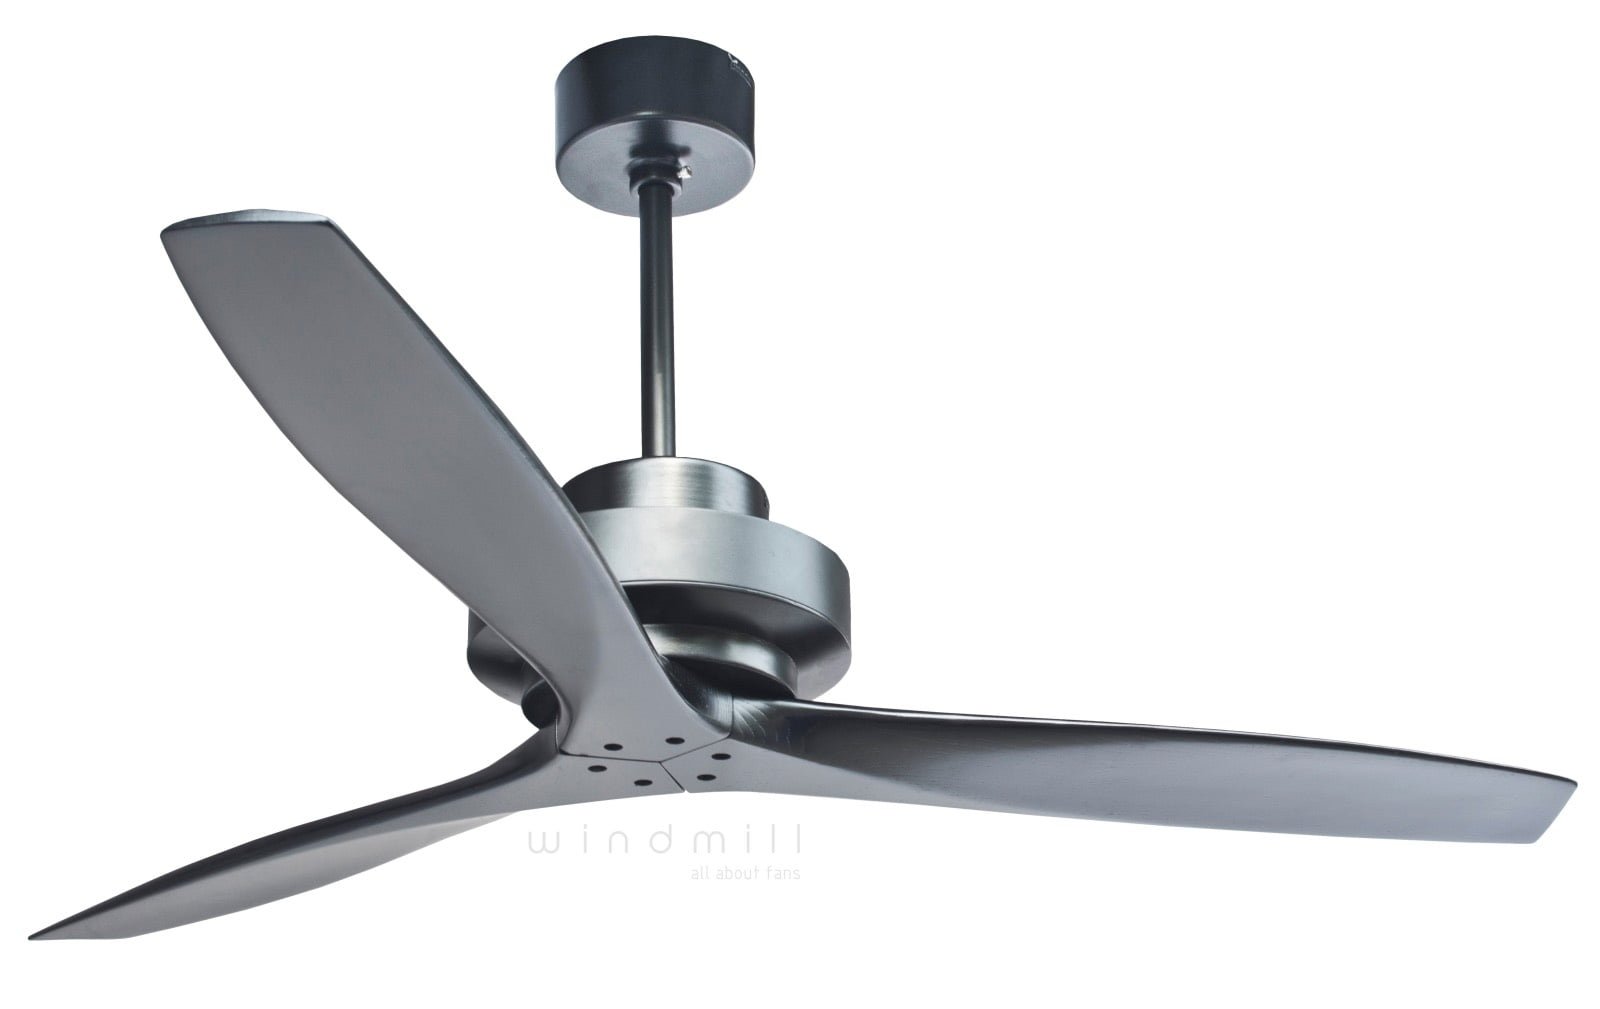 Carved Propeller Blade Ceiling Fan From